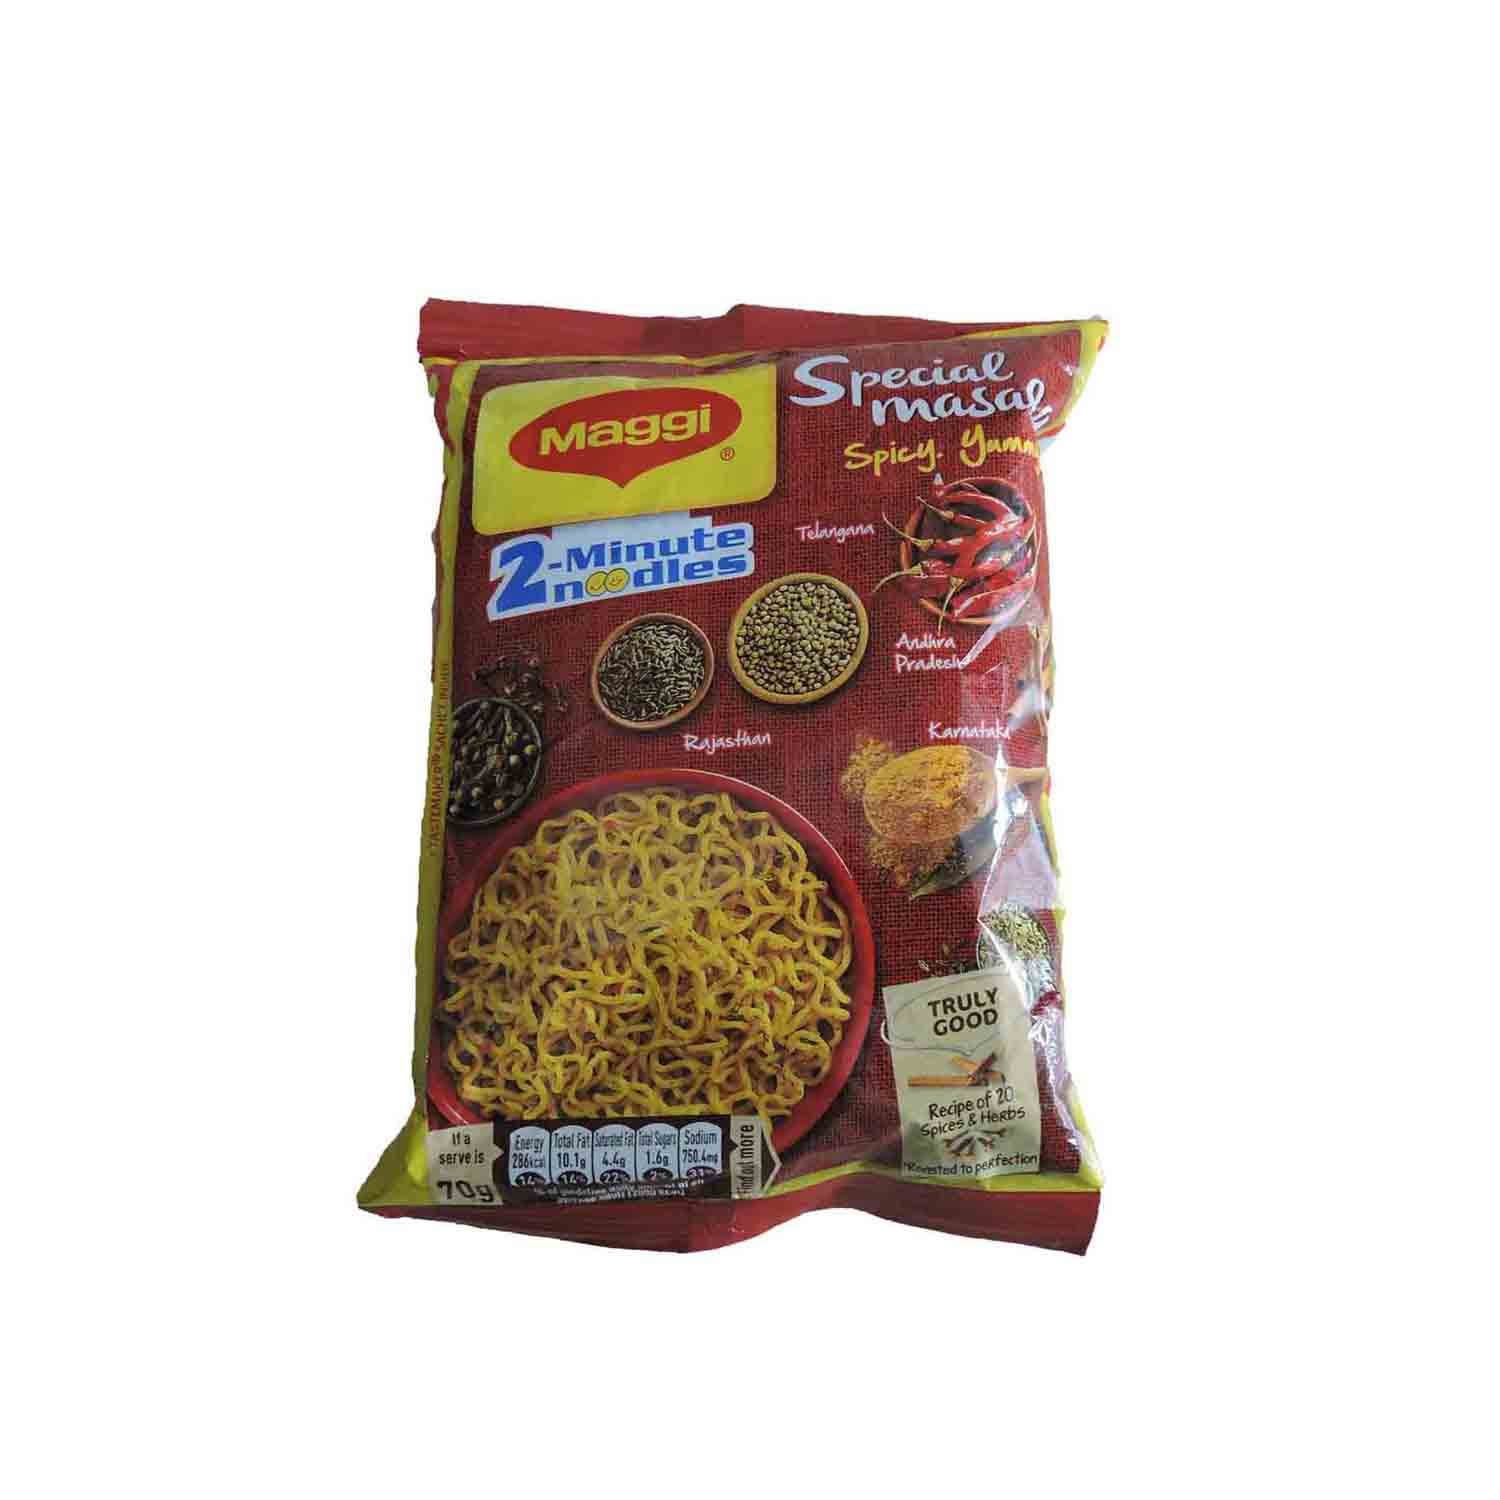 Nestle Maggi Noodles - Pack of 70g - Special Masala - P/C - 2609